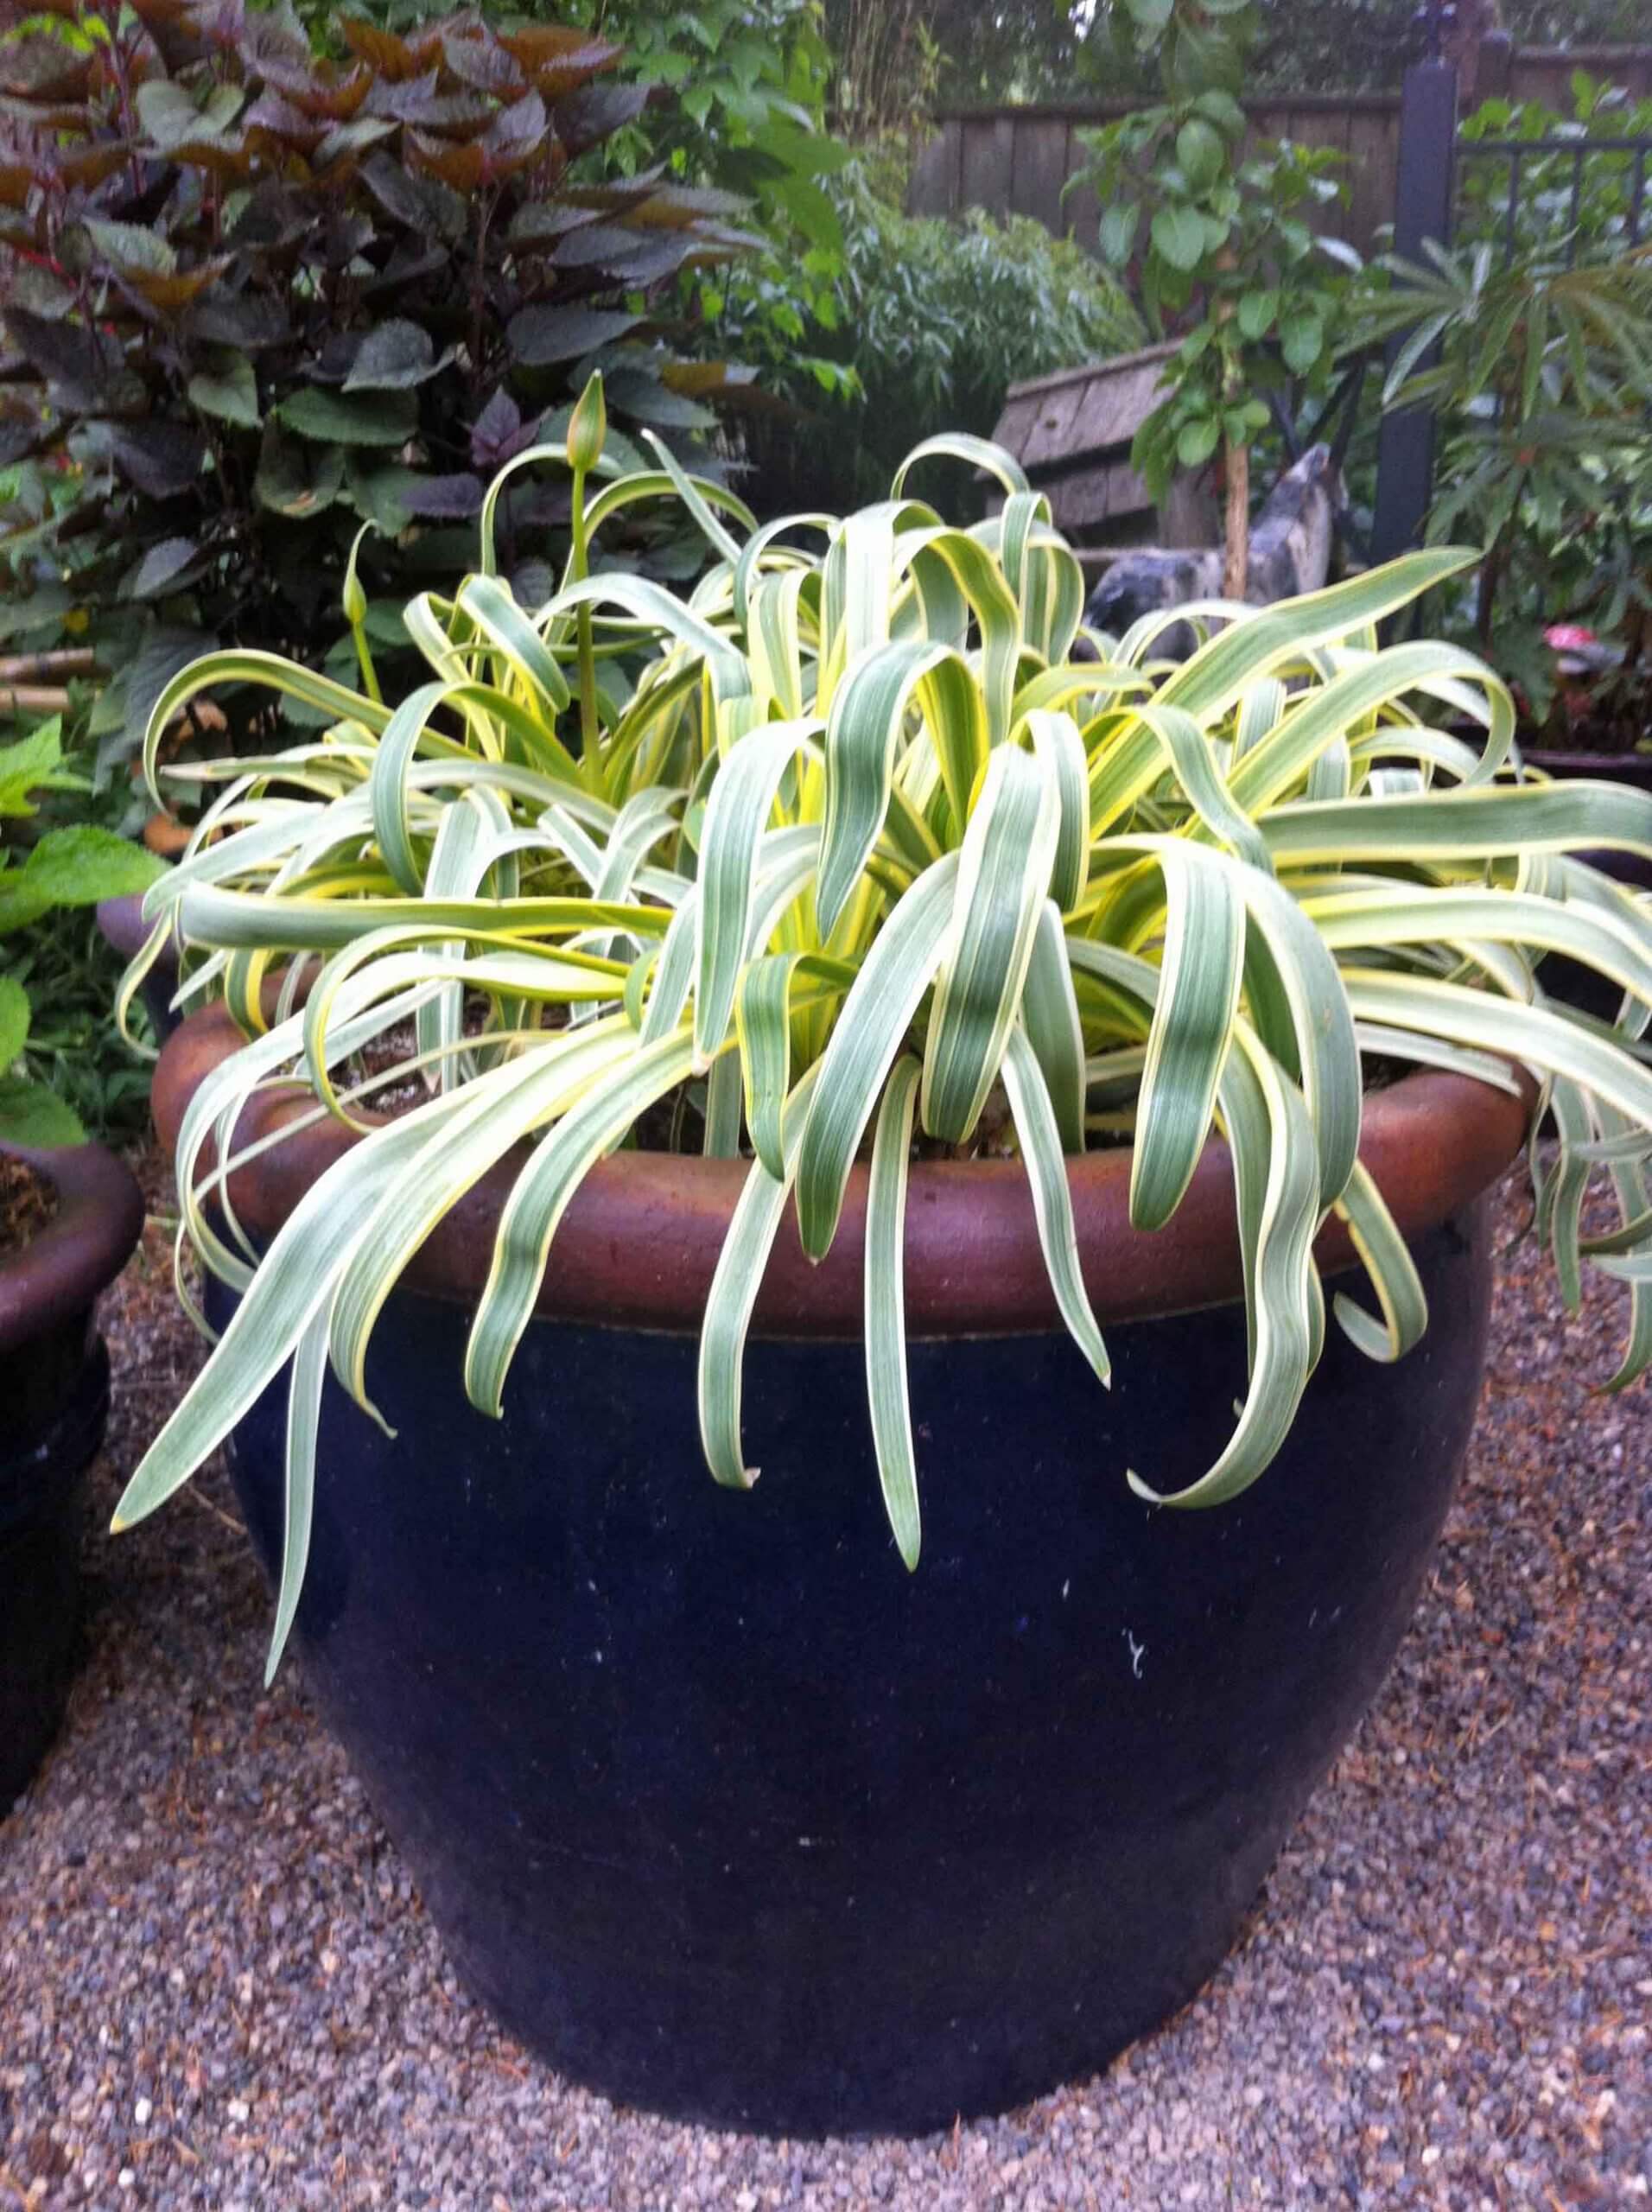 Agapanthus ‘Gold Strike’ (Variegated Lily of the Nile) is a foliar showstopper.